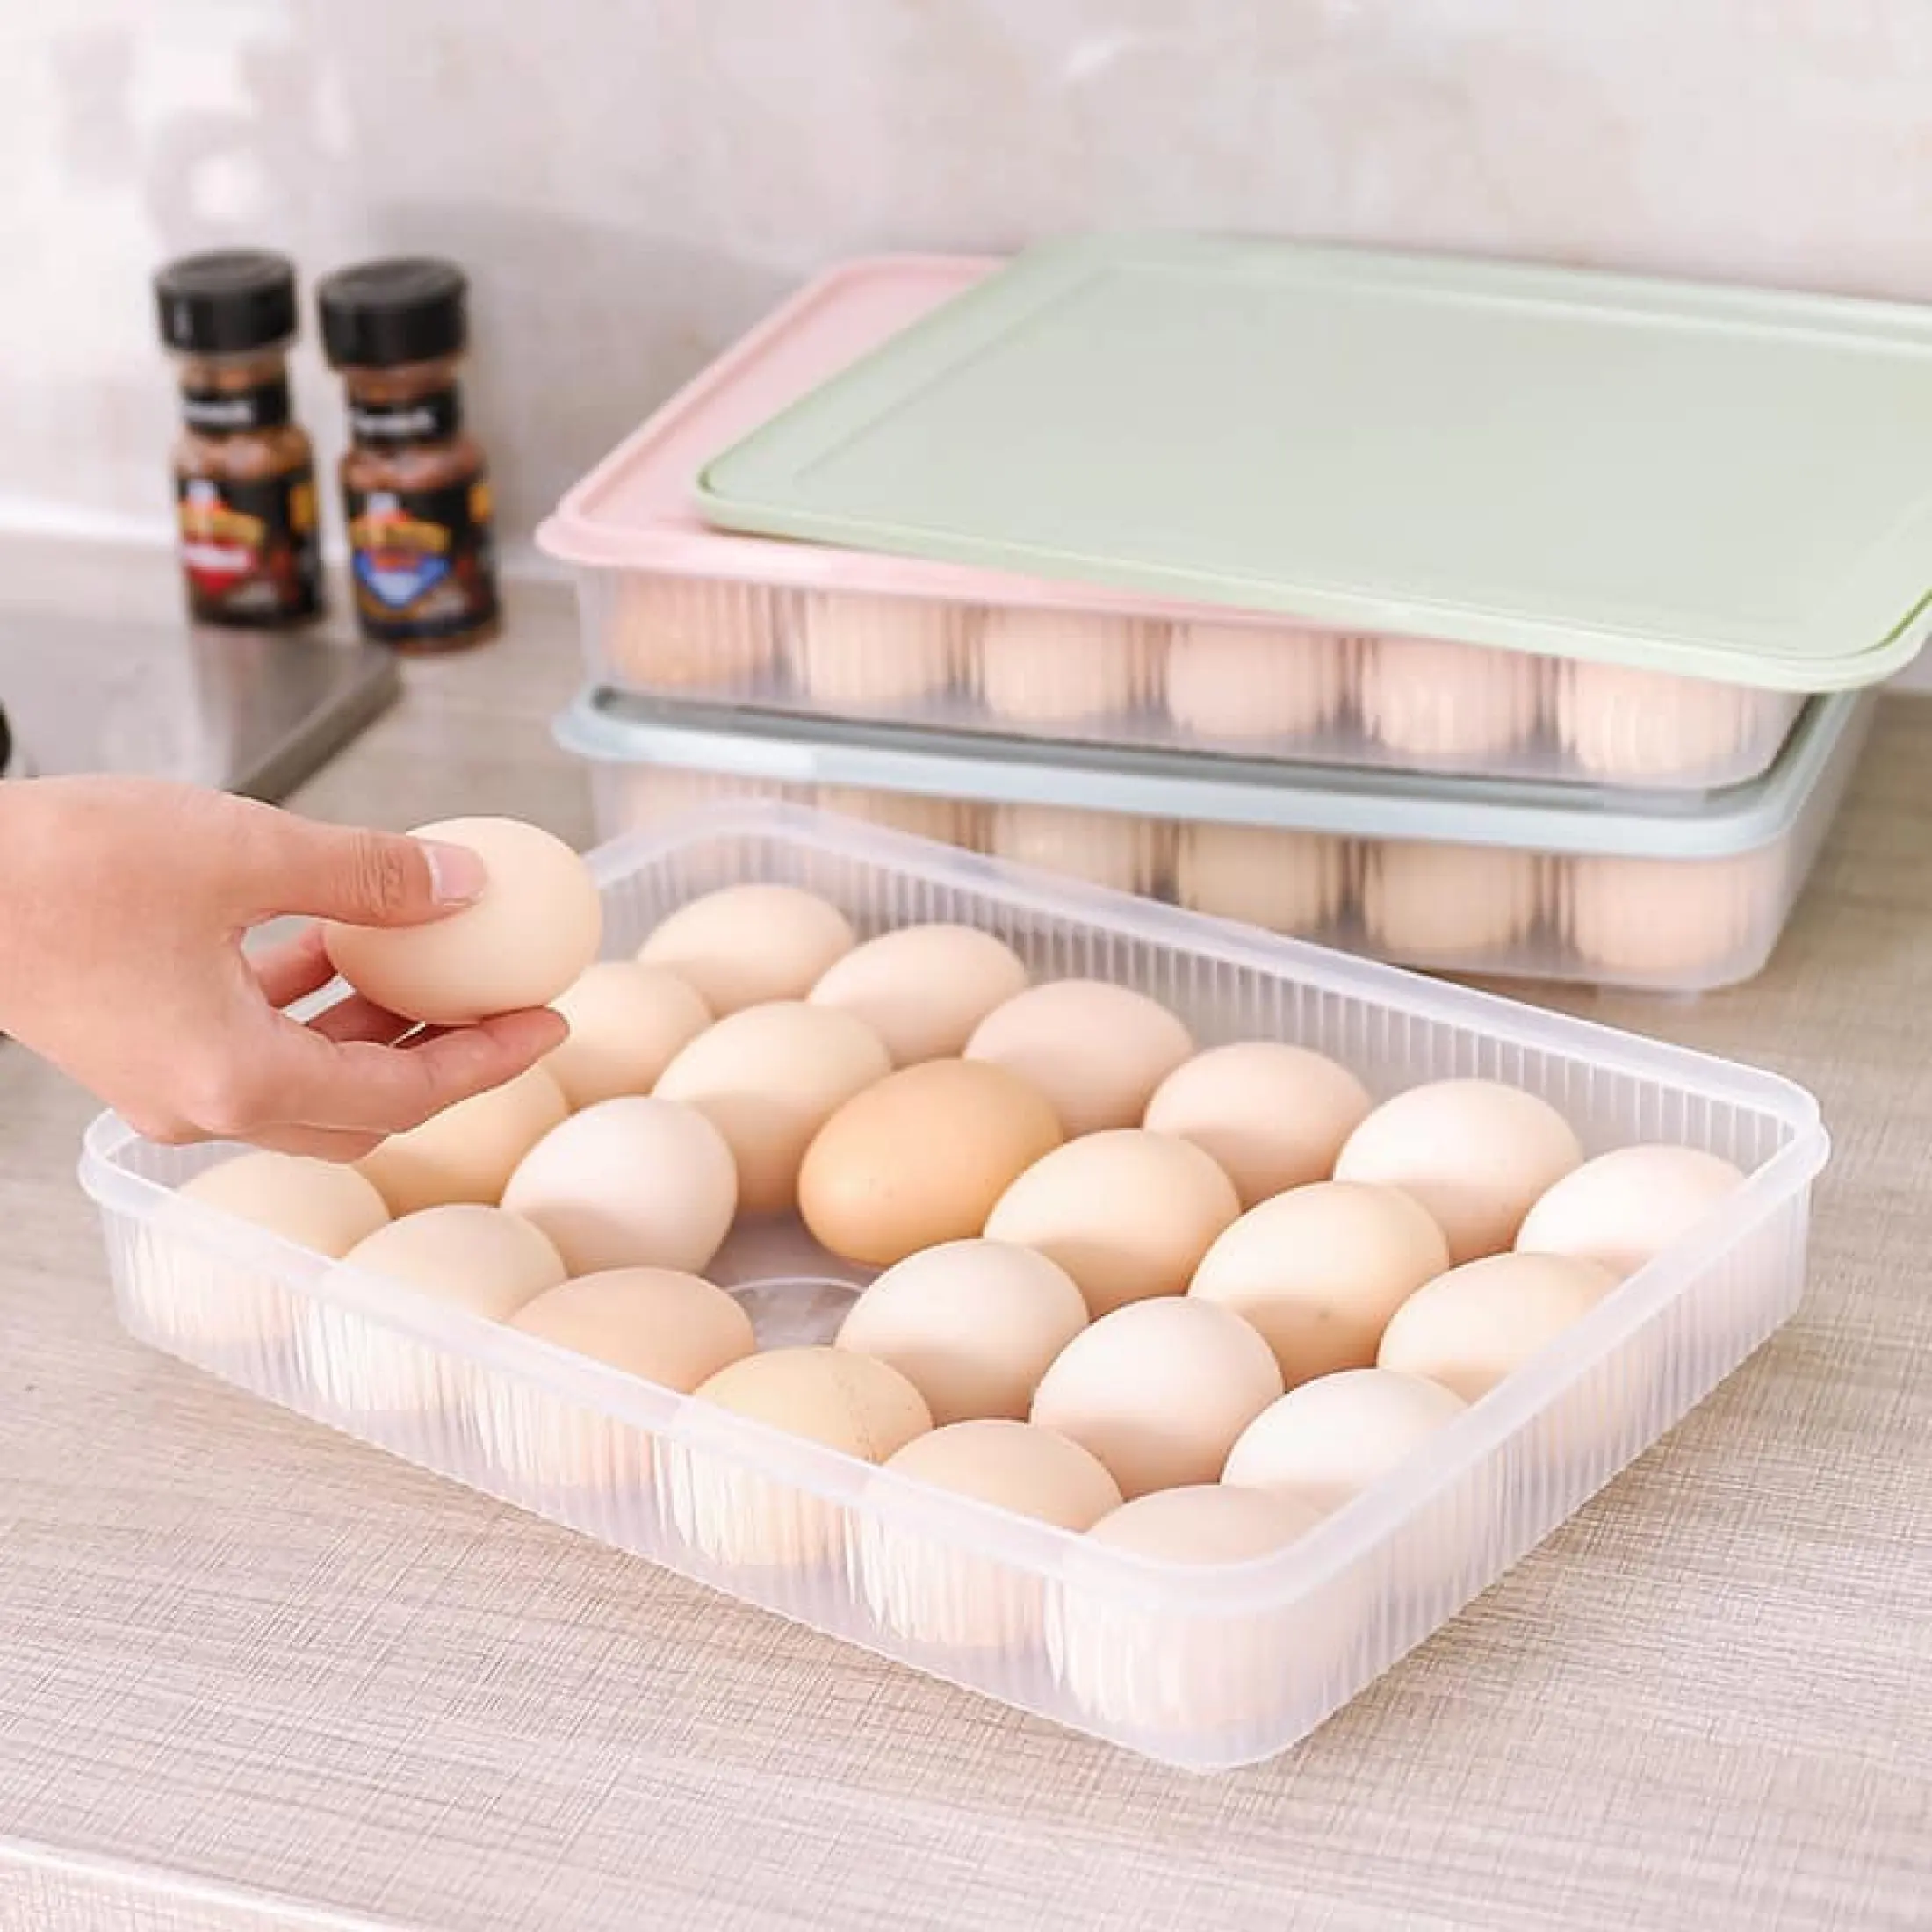 24 Grid Refrigerator Egg Holder Storage Egg Tray with Lid Container Organizer